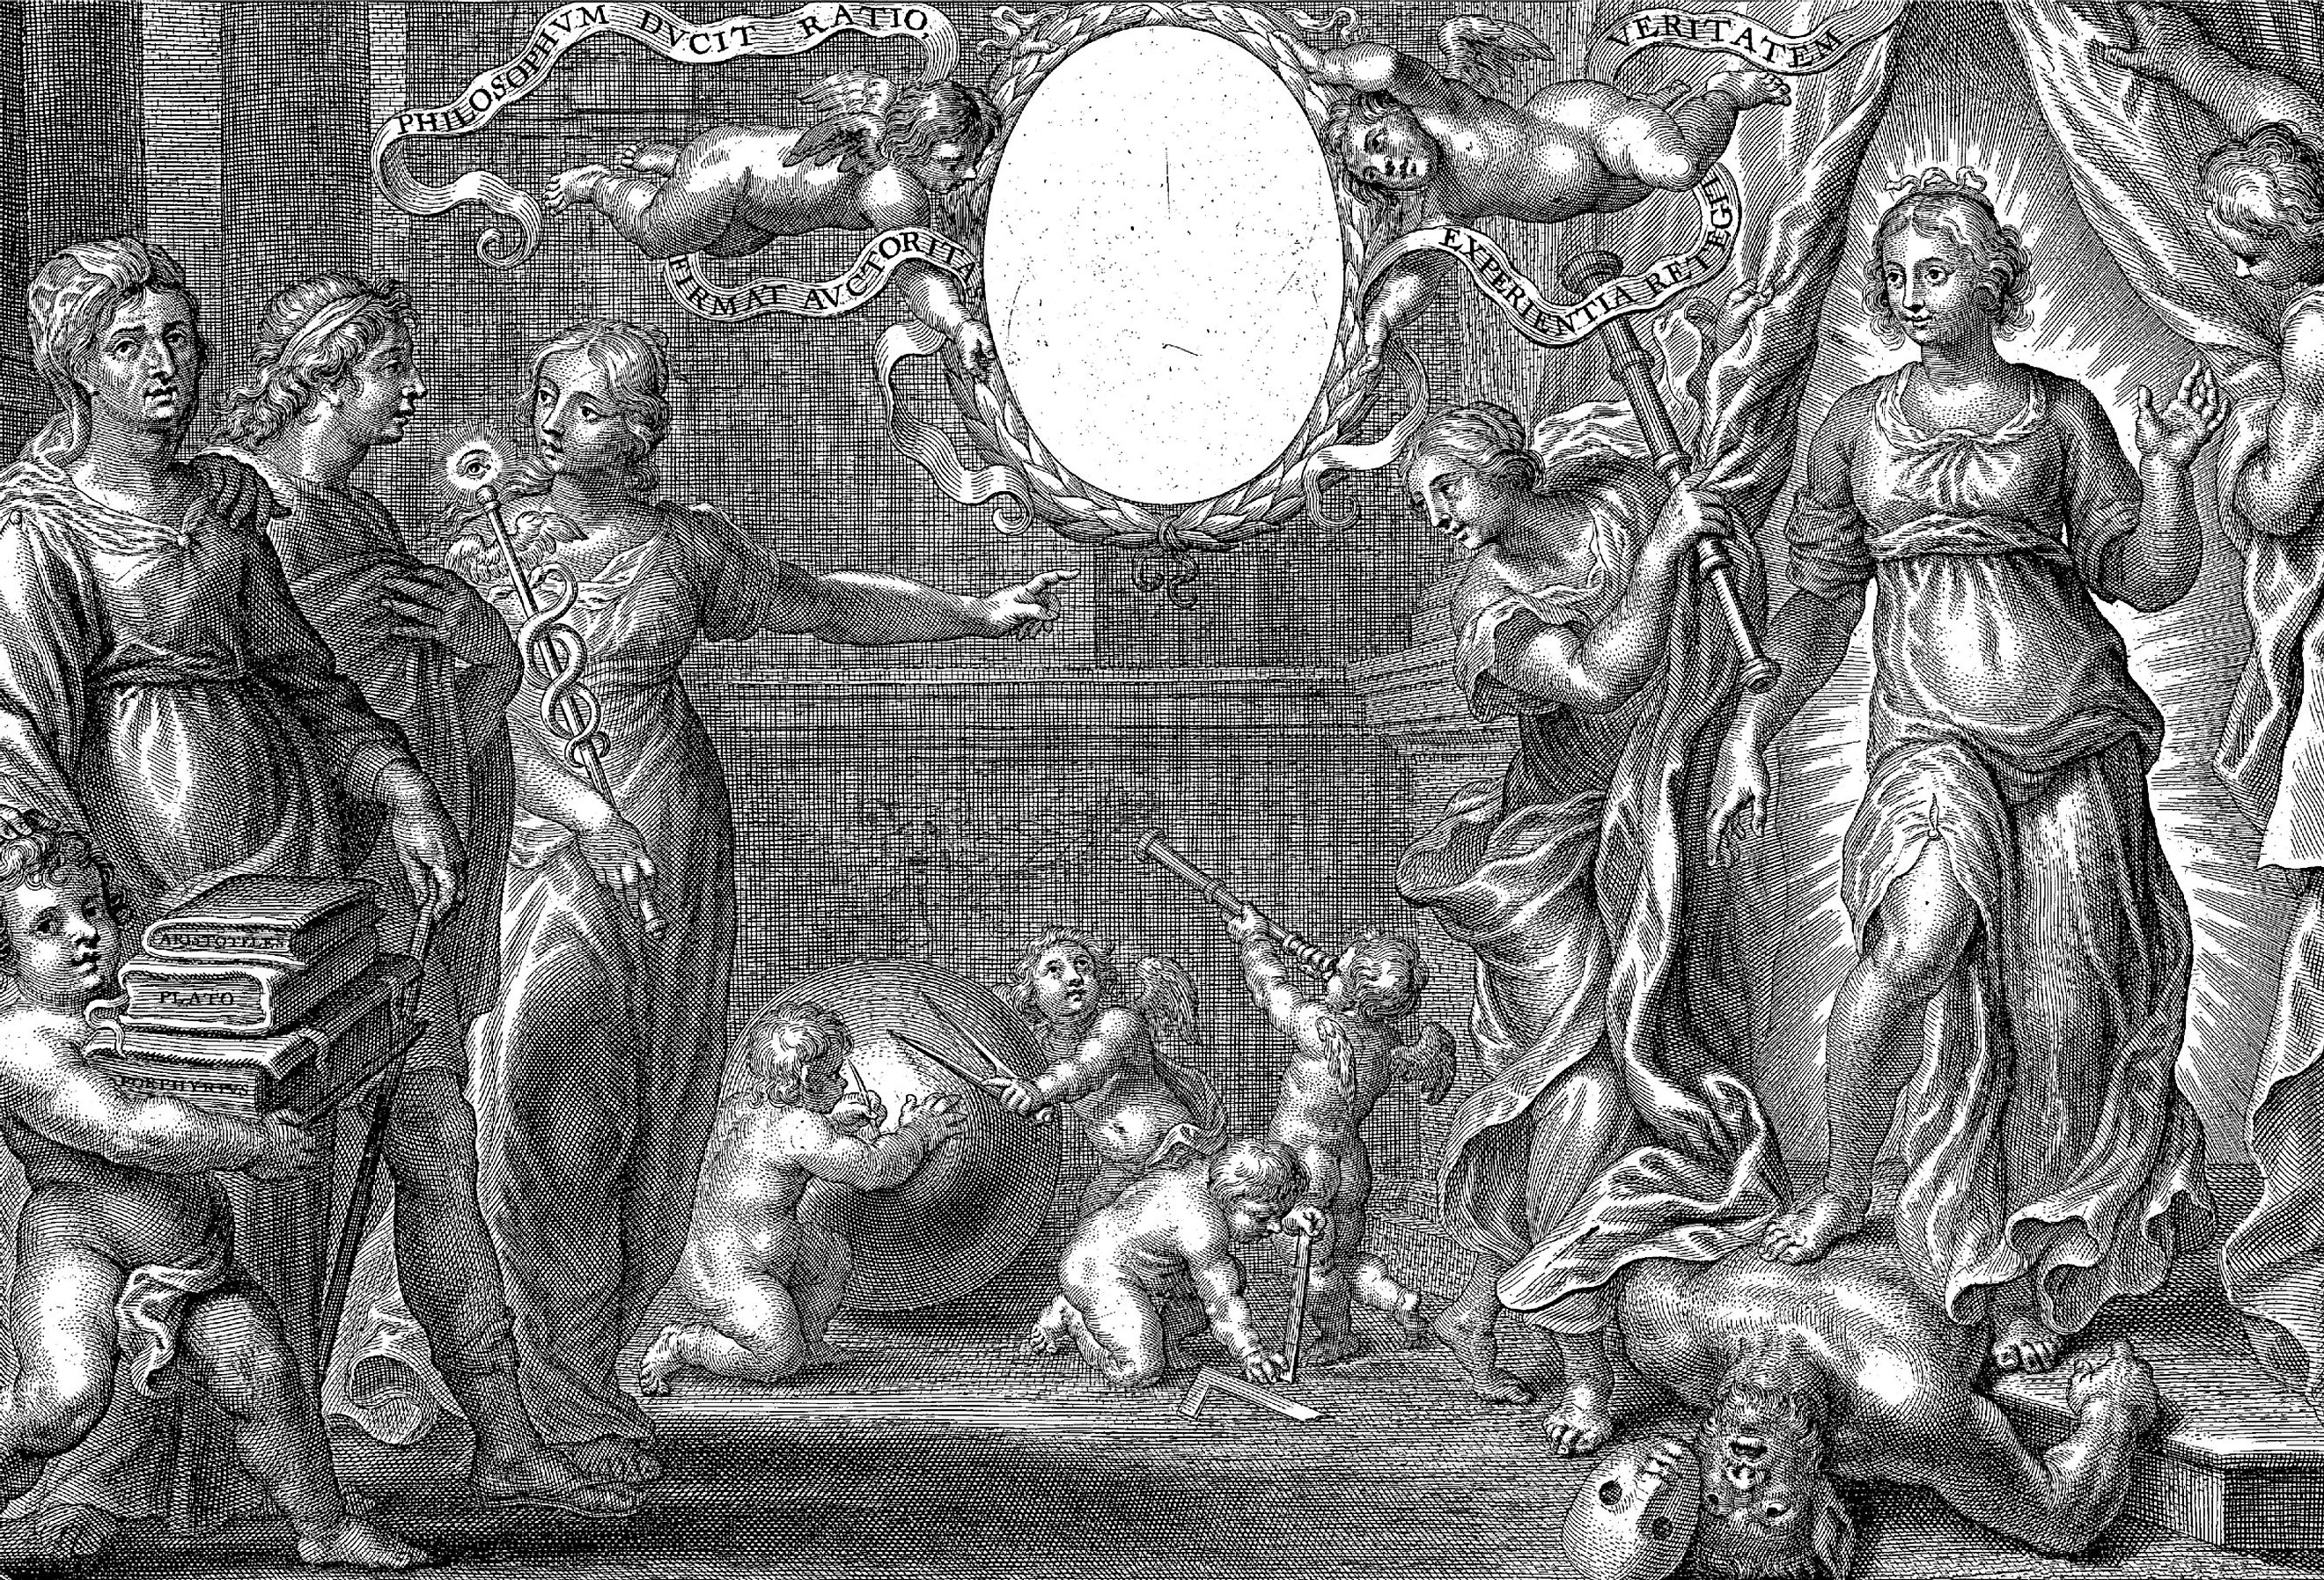 Black and white Greek Philosophy depiction, featuring women.